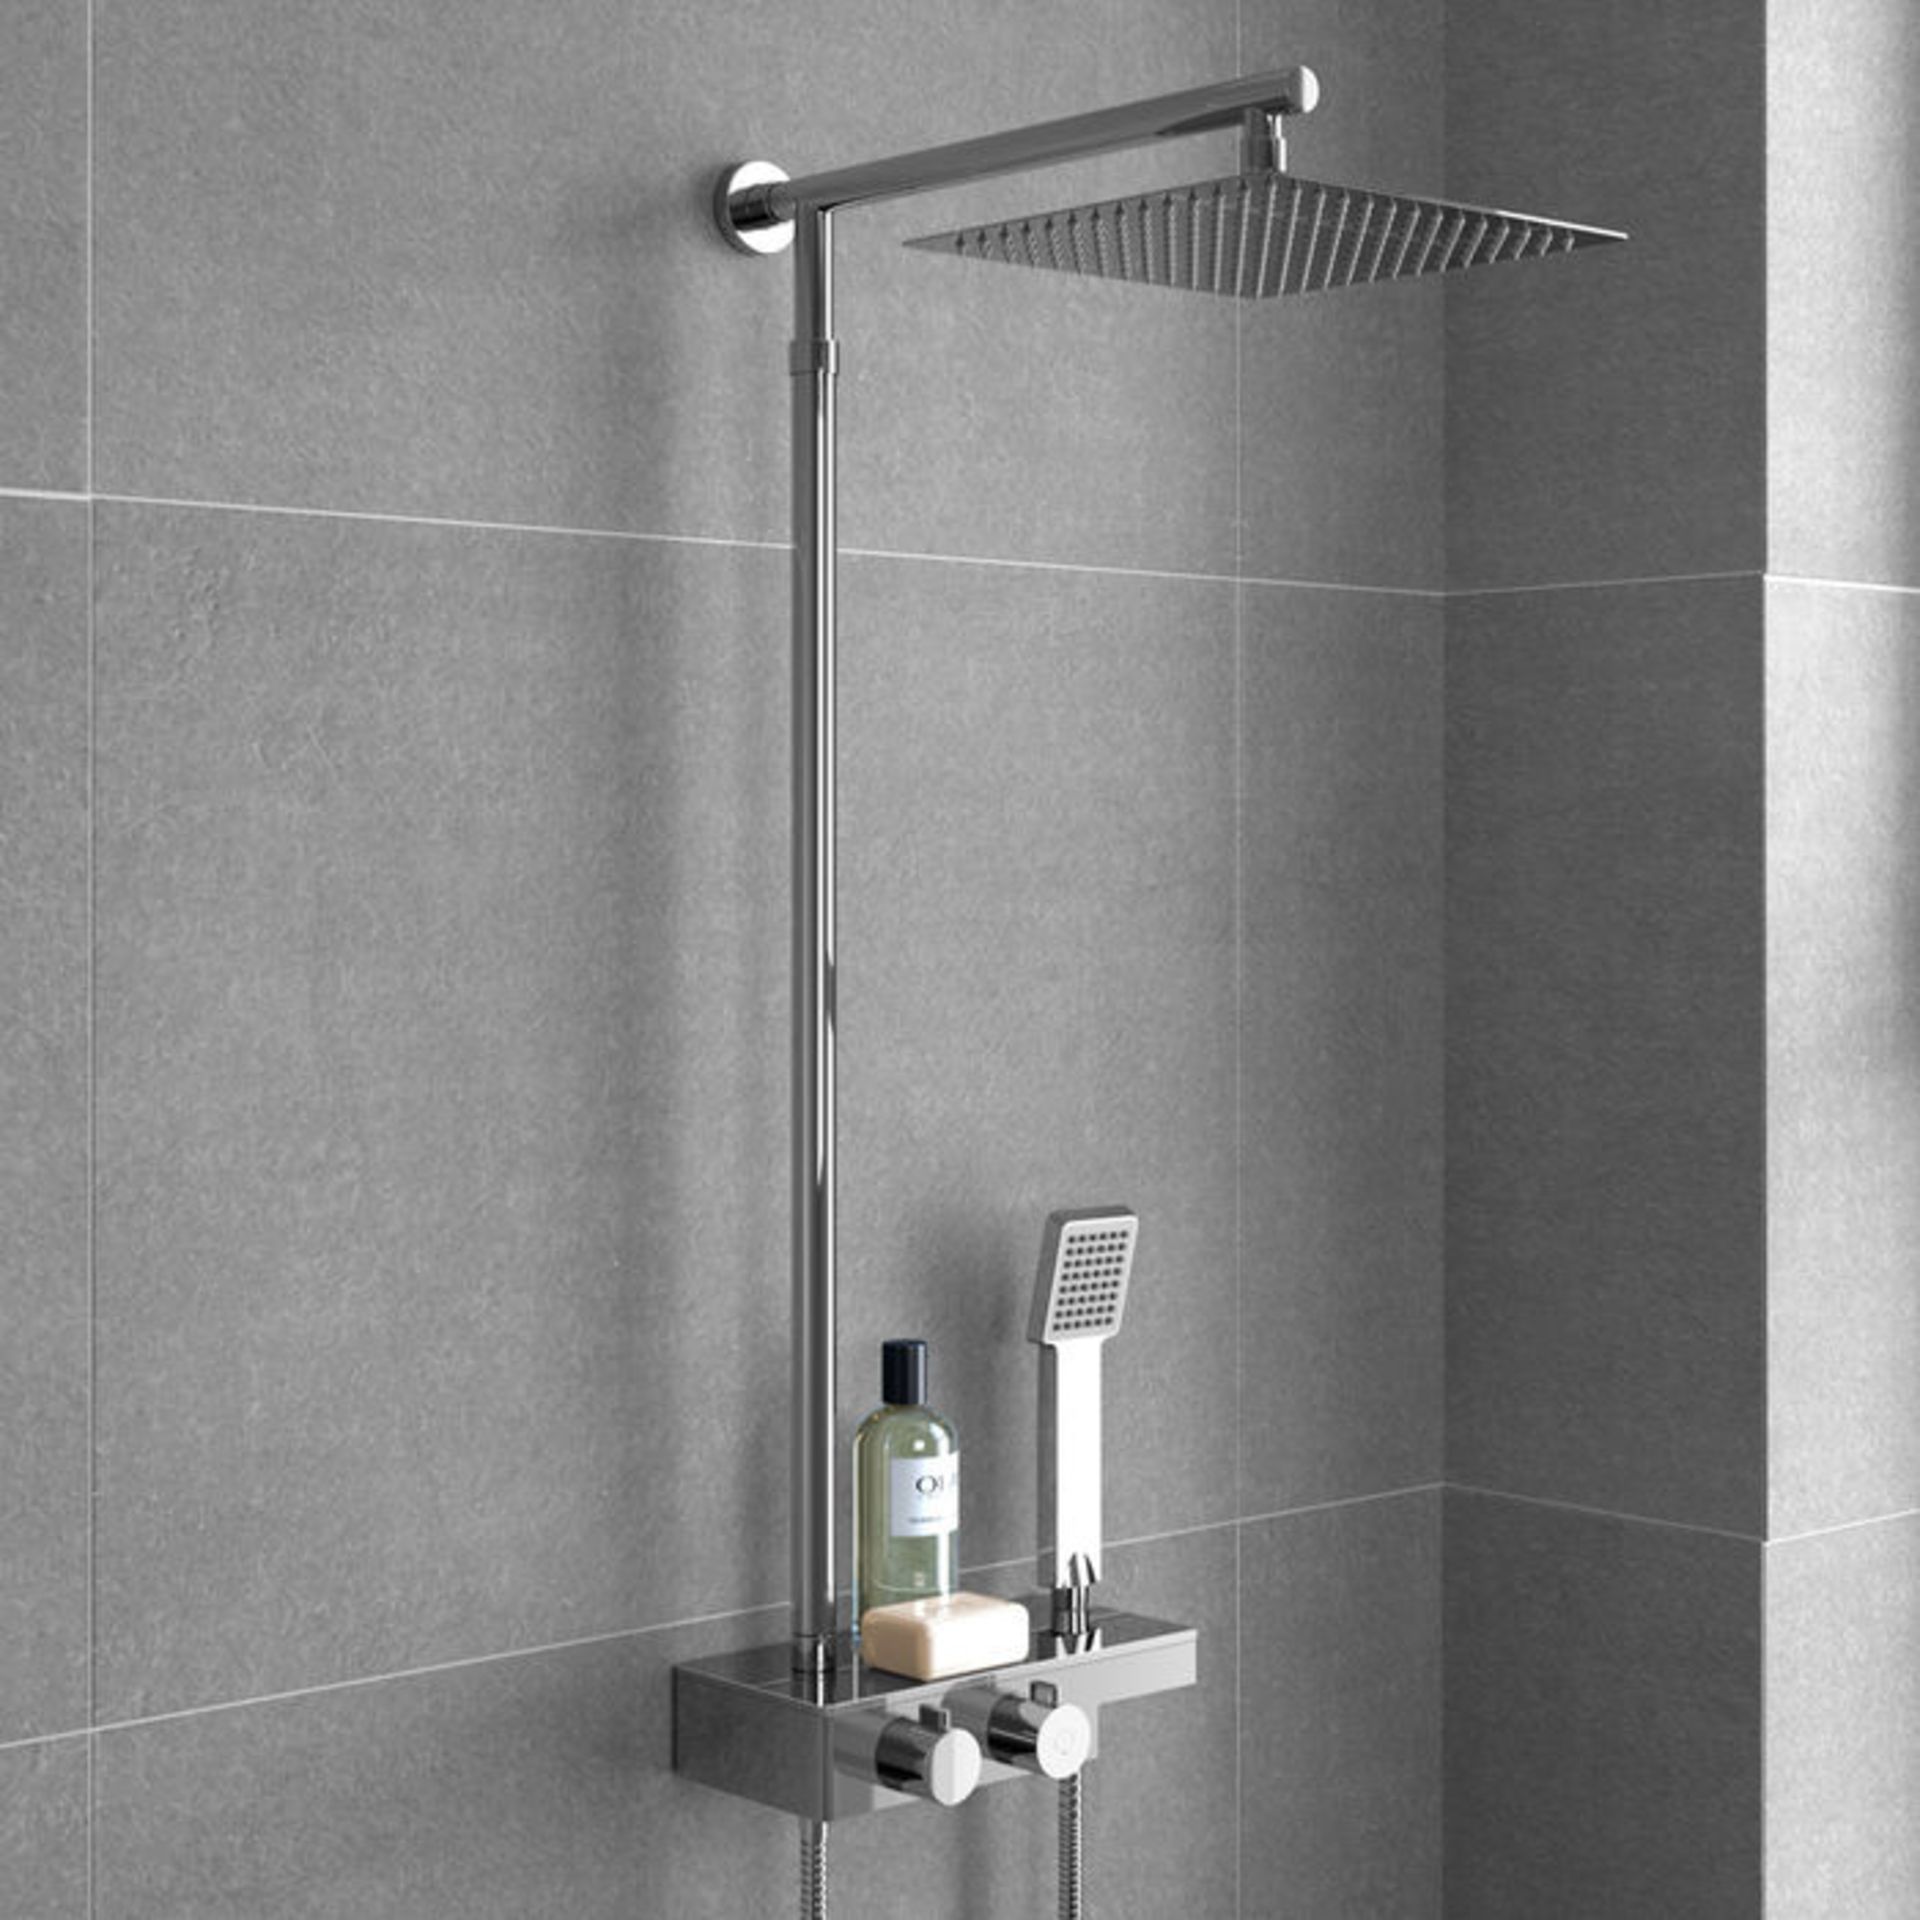 (V47) Thermostatic Exposed Shower Kit 250mm Square Head Handheld RRP £349.99 Style meets function - Image 3 of 3